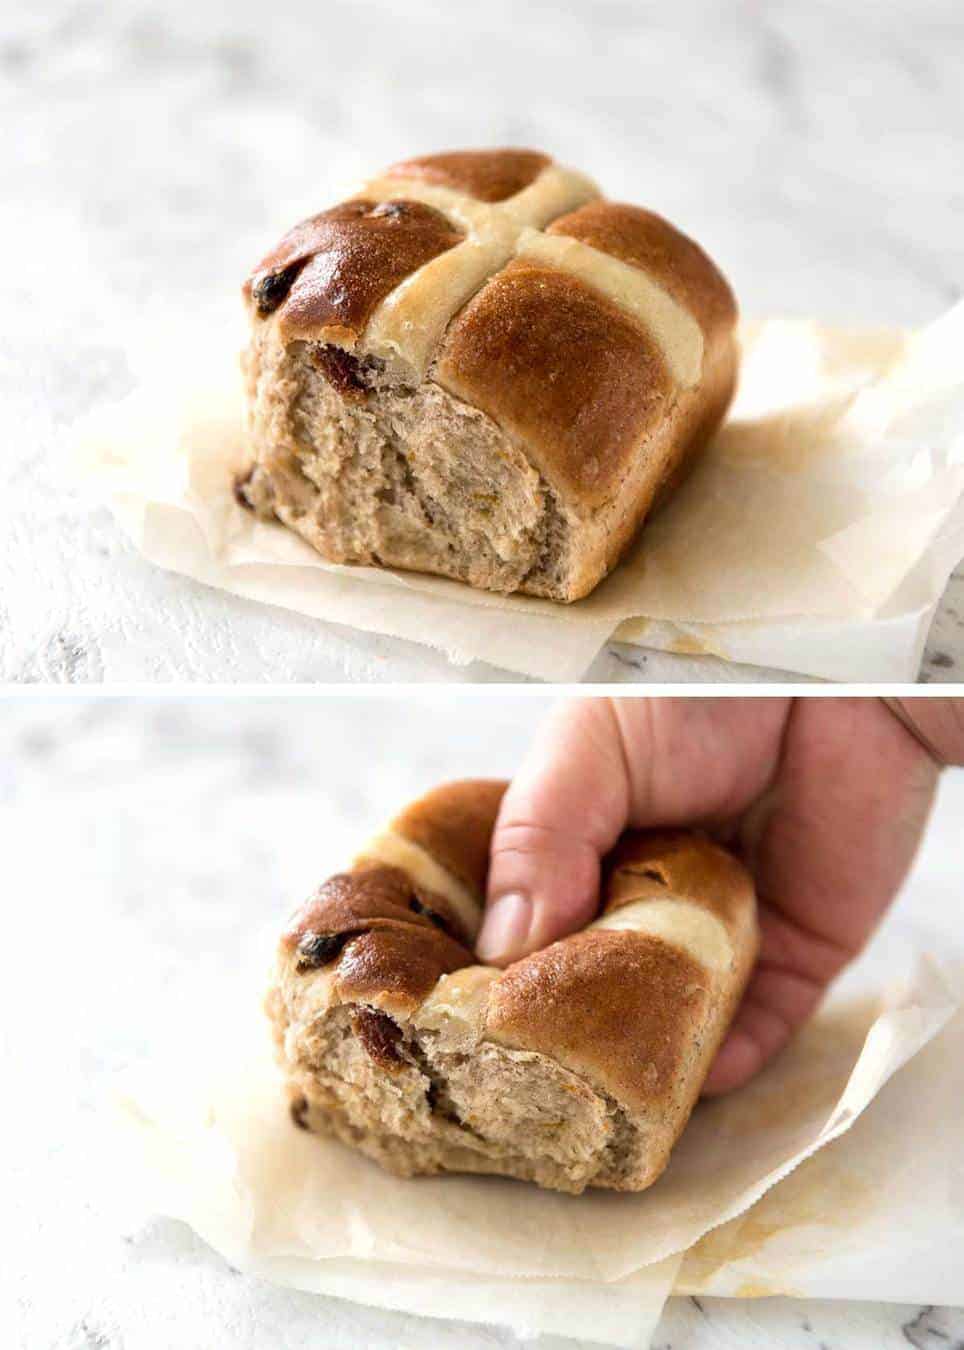 Easy Hot Cross Buns Recipe - perfectly spiced, fluffy and moist, with a no knead, no stand mixer option! www.reciptineats.com